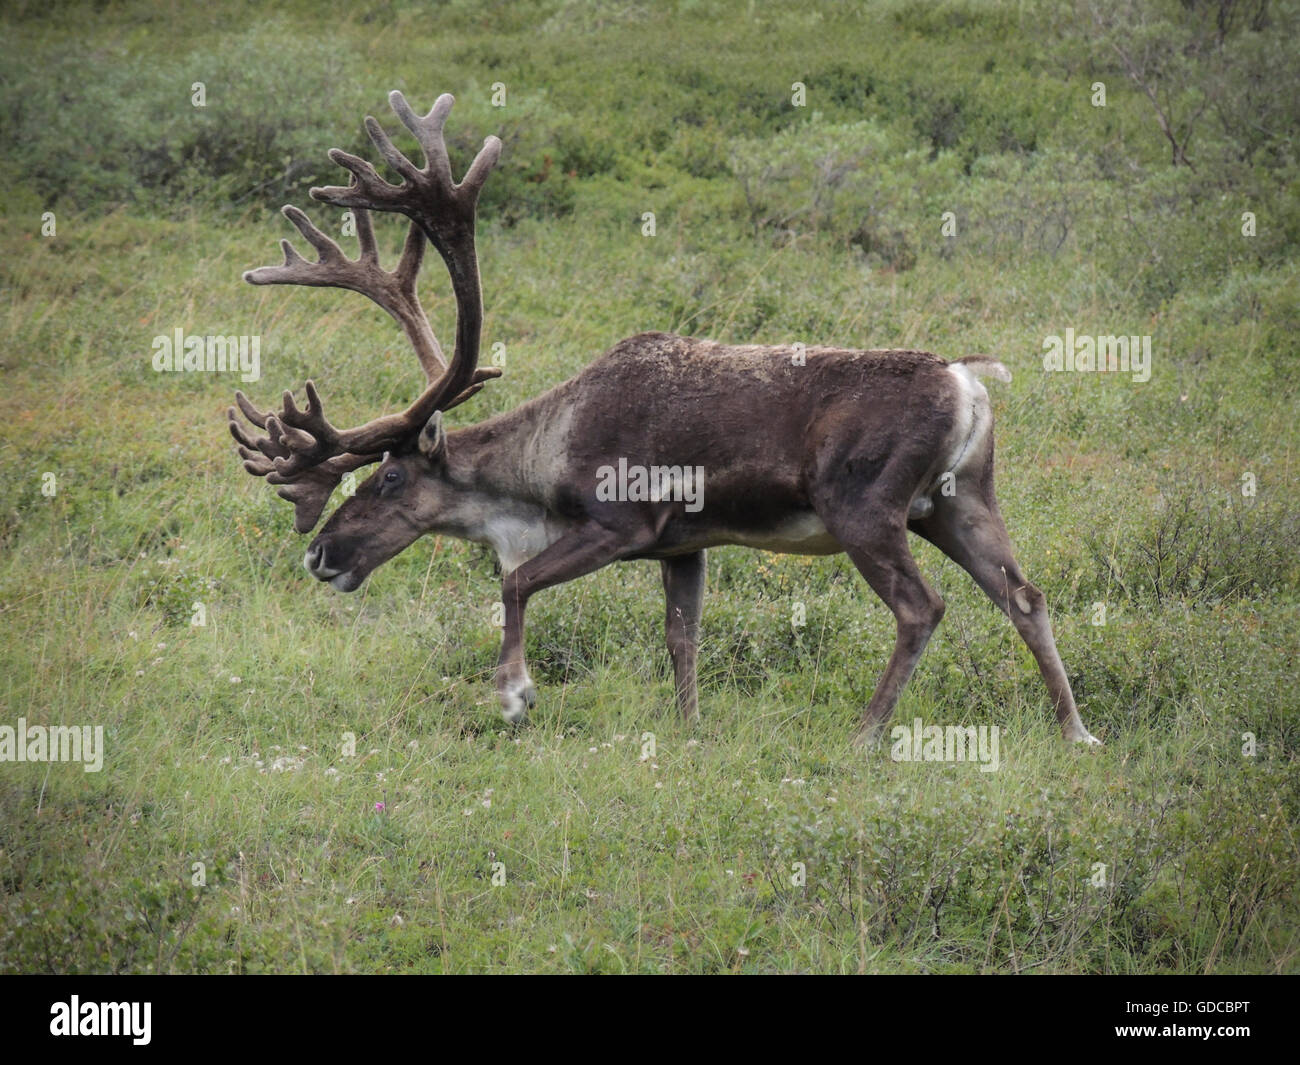 Bull Caribou (Rangifer tarandus) with antlers in the velvet that nourishes their growth until it is shed prior to the fall rut. Stock Photo